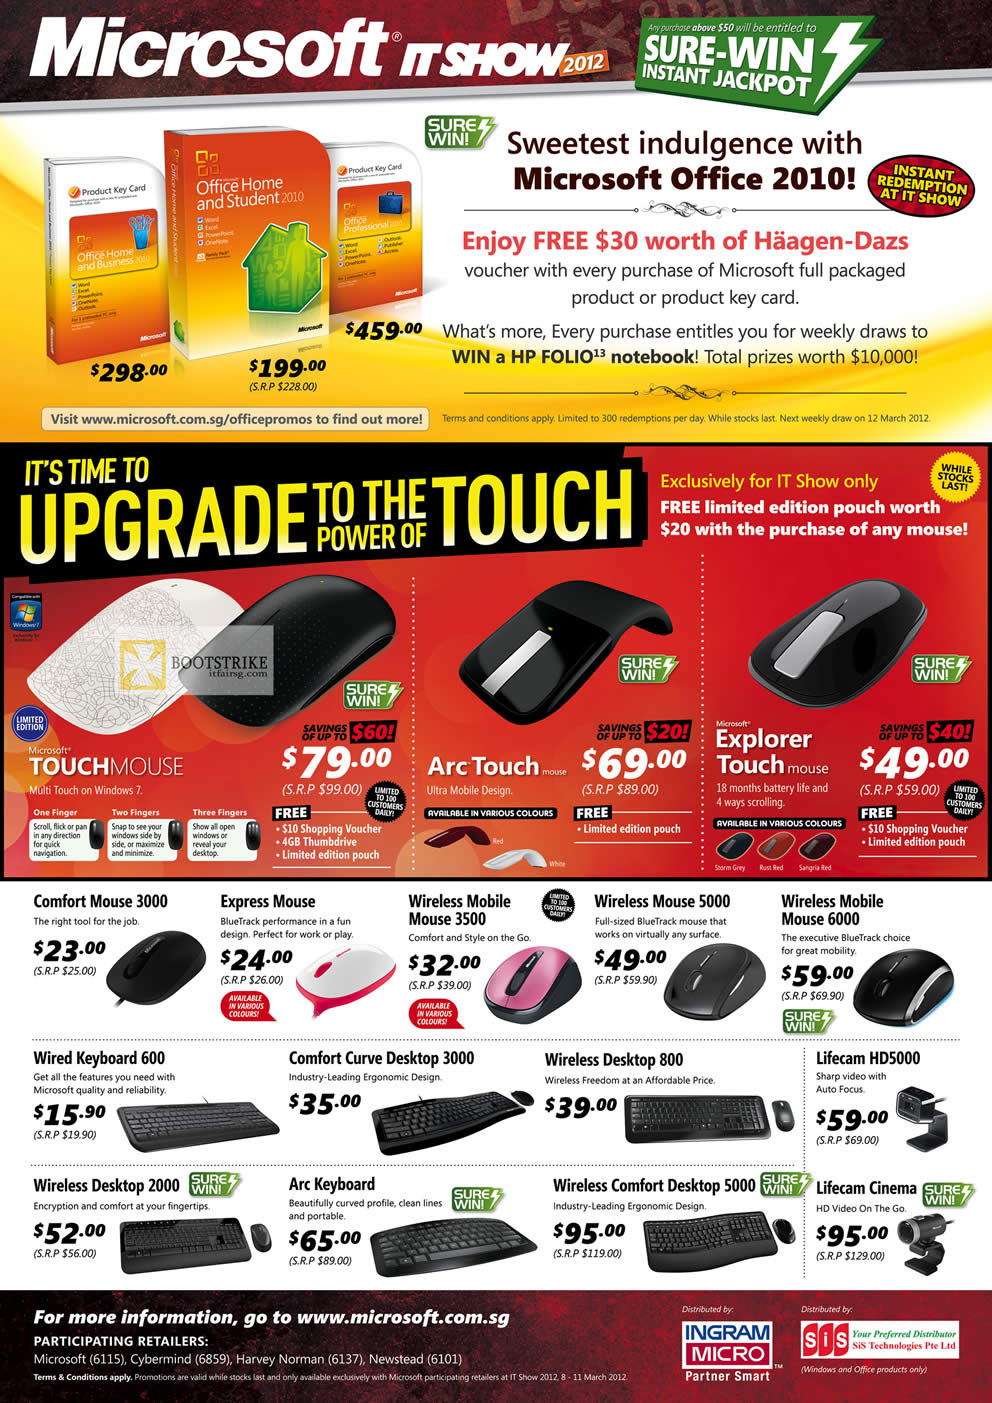 IT SHOW 2012 price list image brochure of Microsoft Hardware, Office 2010, Touch Mouse, Arc Touch, Explorer Touch, Comfort, Wireless Mobile 3500, 5000, 6000, Keyboard, Lifecam HD5000 Webcam, Cinema